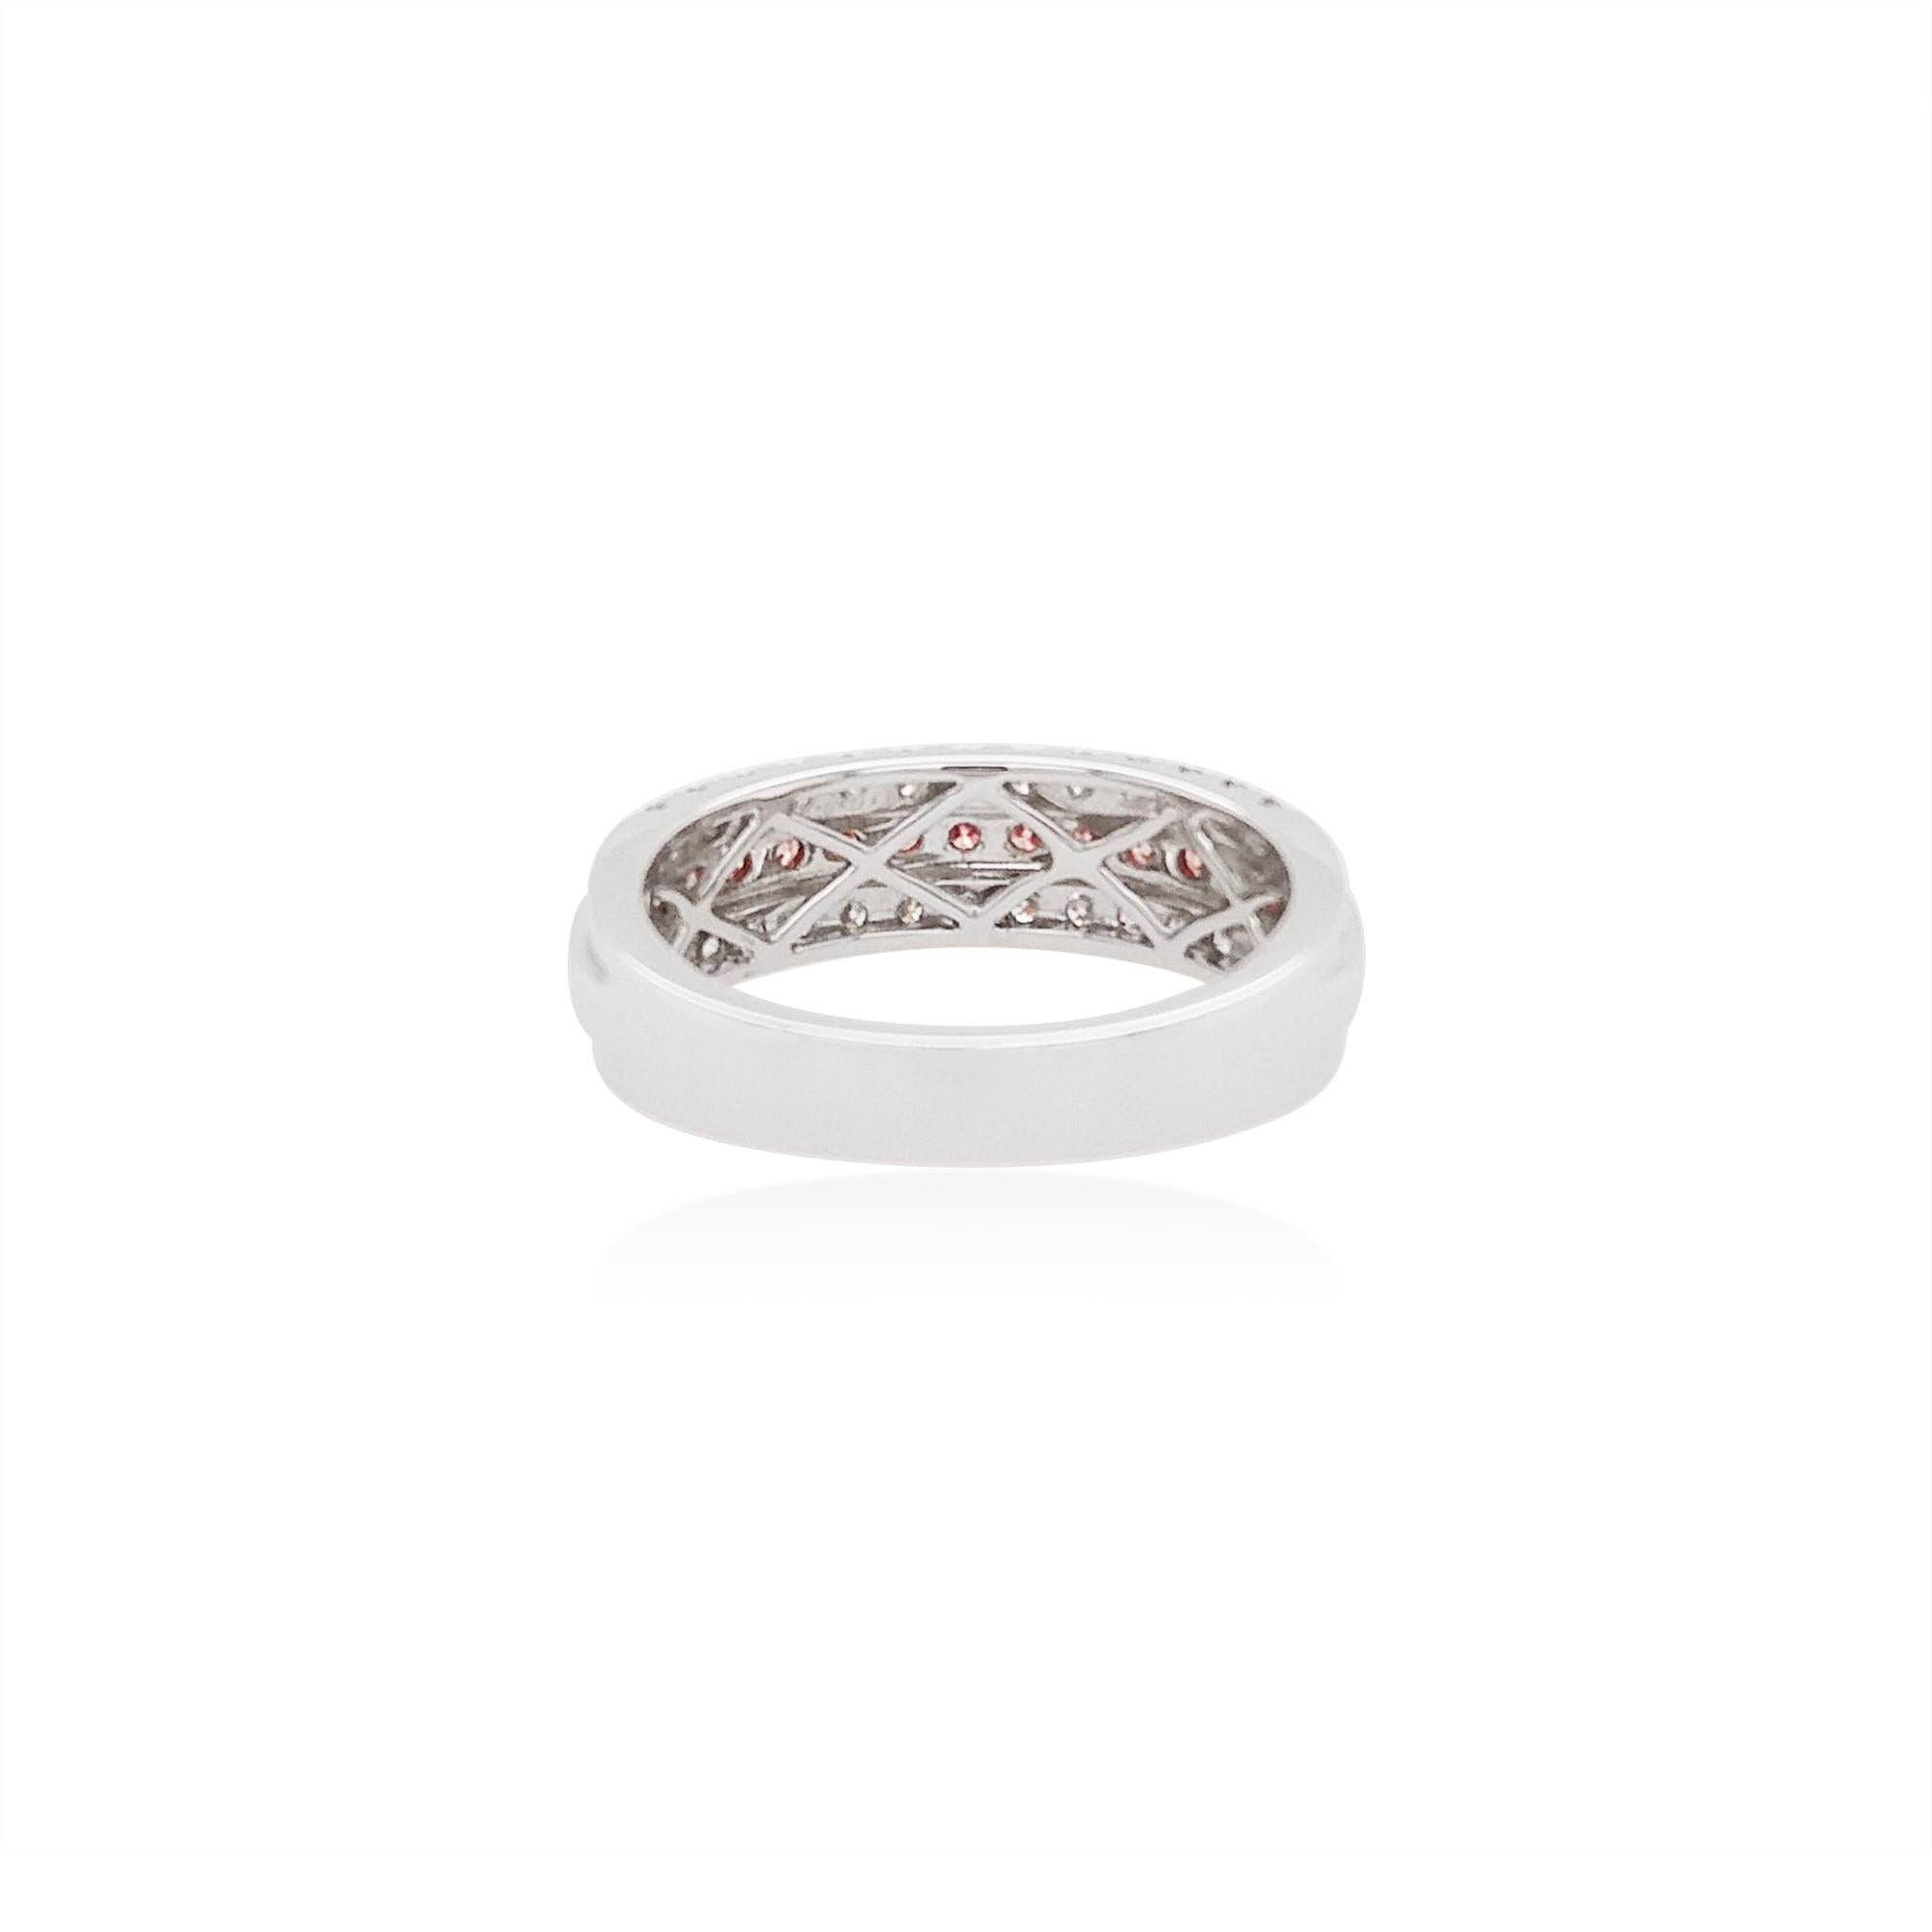 This delicate Platinum ring band features a row of lustrous natural Argyle Pink Diamonds at the forefront of its design. The spectacular hues of the Pink Diamonds are perfectly accentuated by the Platinum and K18 Pink Gold setting and elegant white